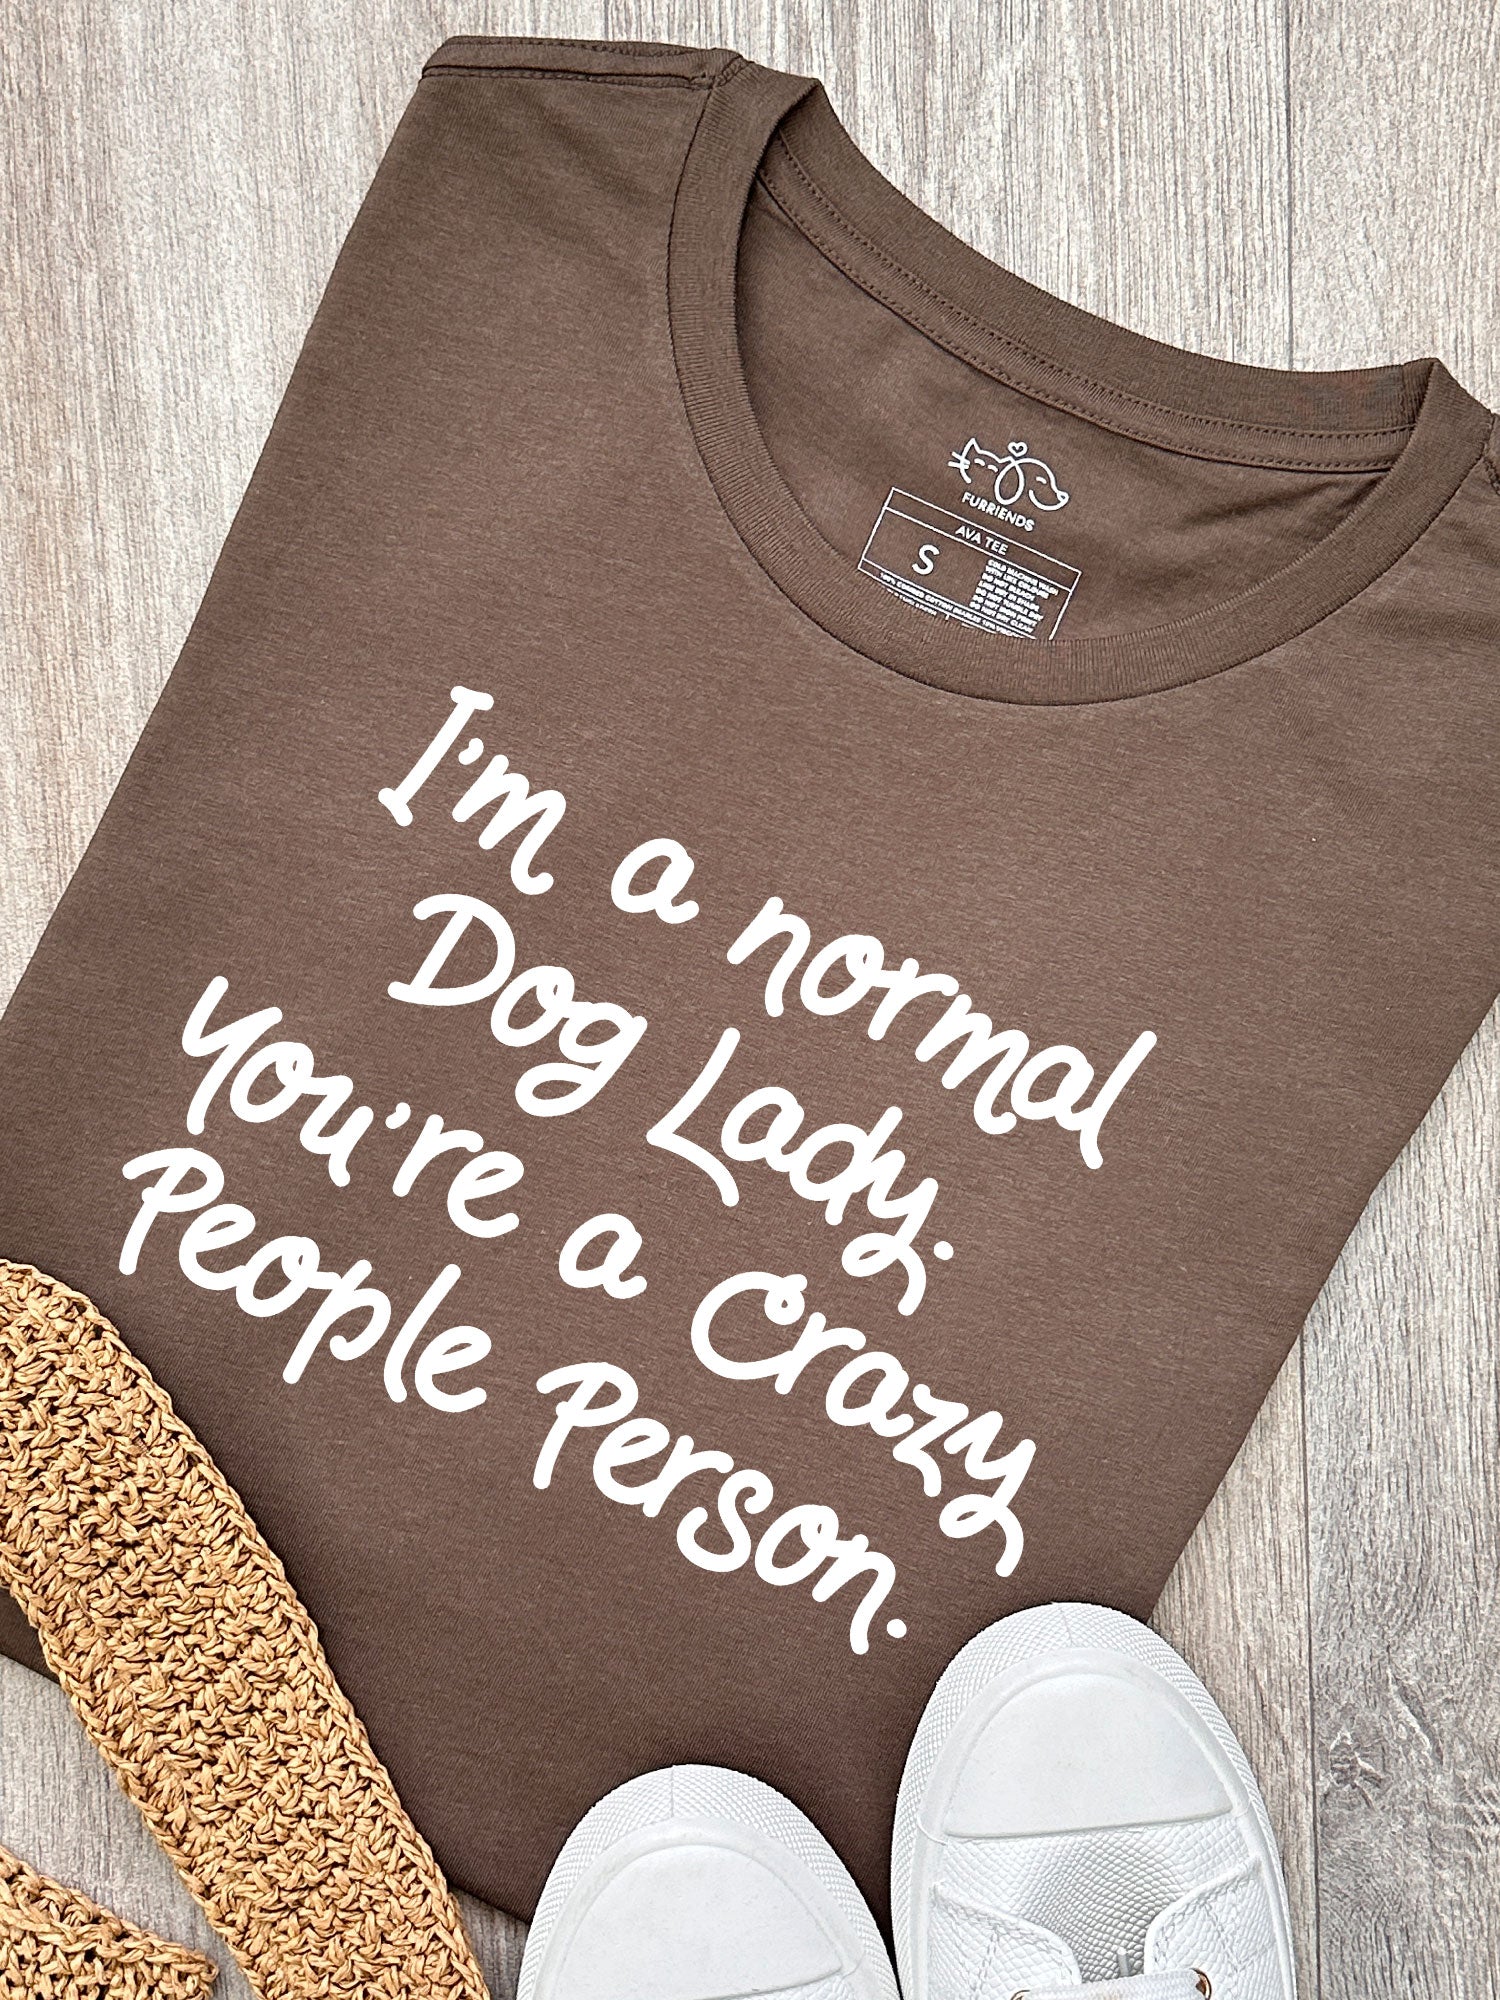 Normal Dog Lady